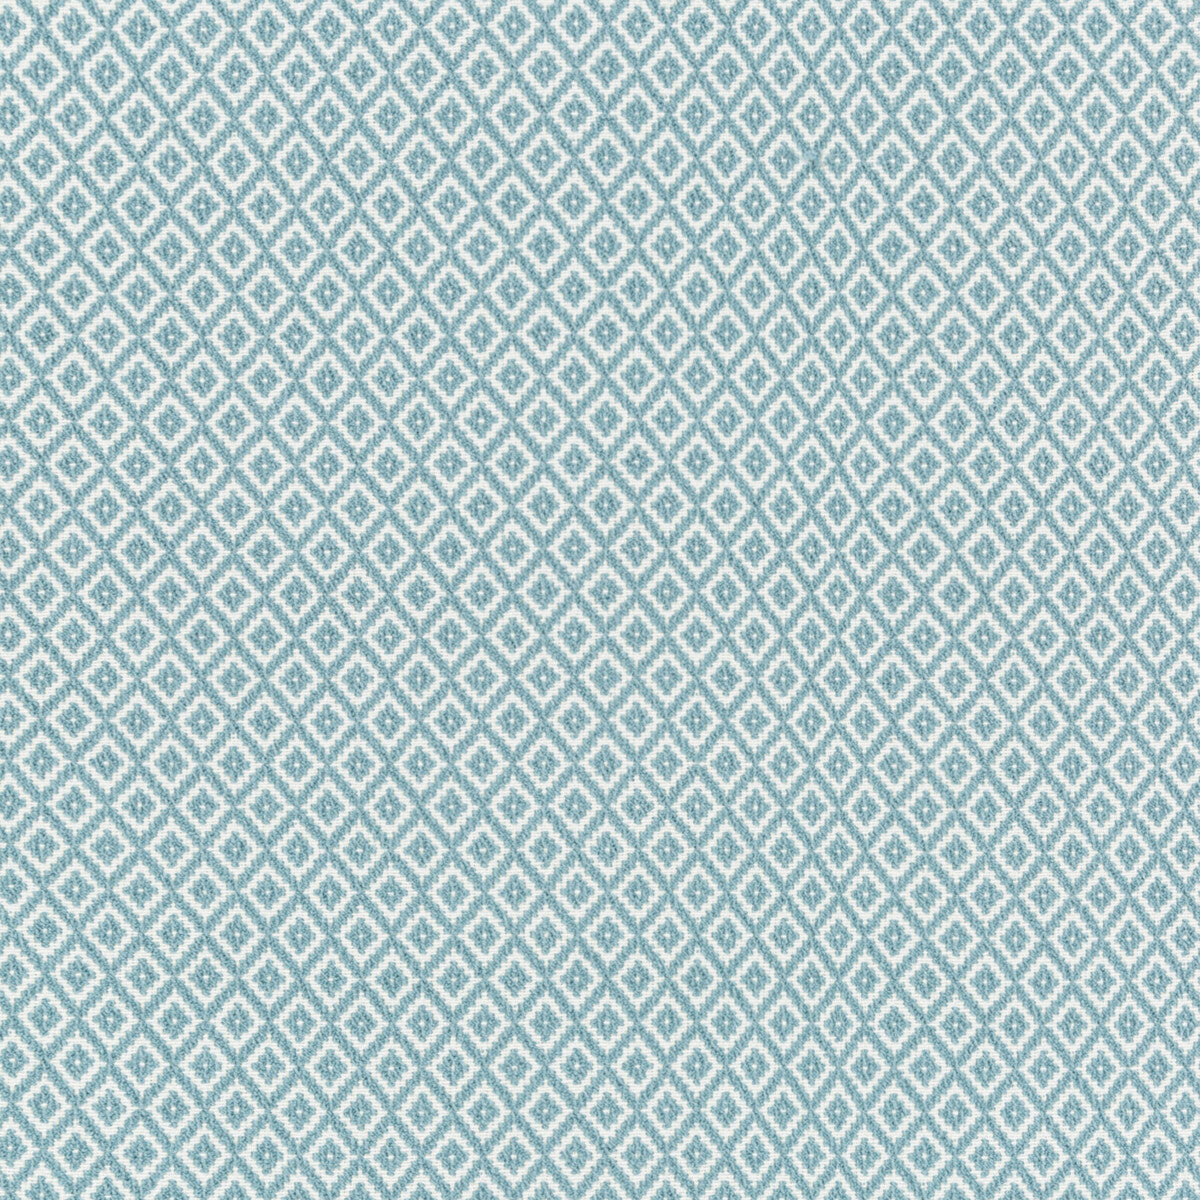 New Dimension fabric in capri color - pattern 35498.15.0 - by Kravet Couture in the Vista collection